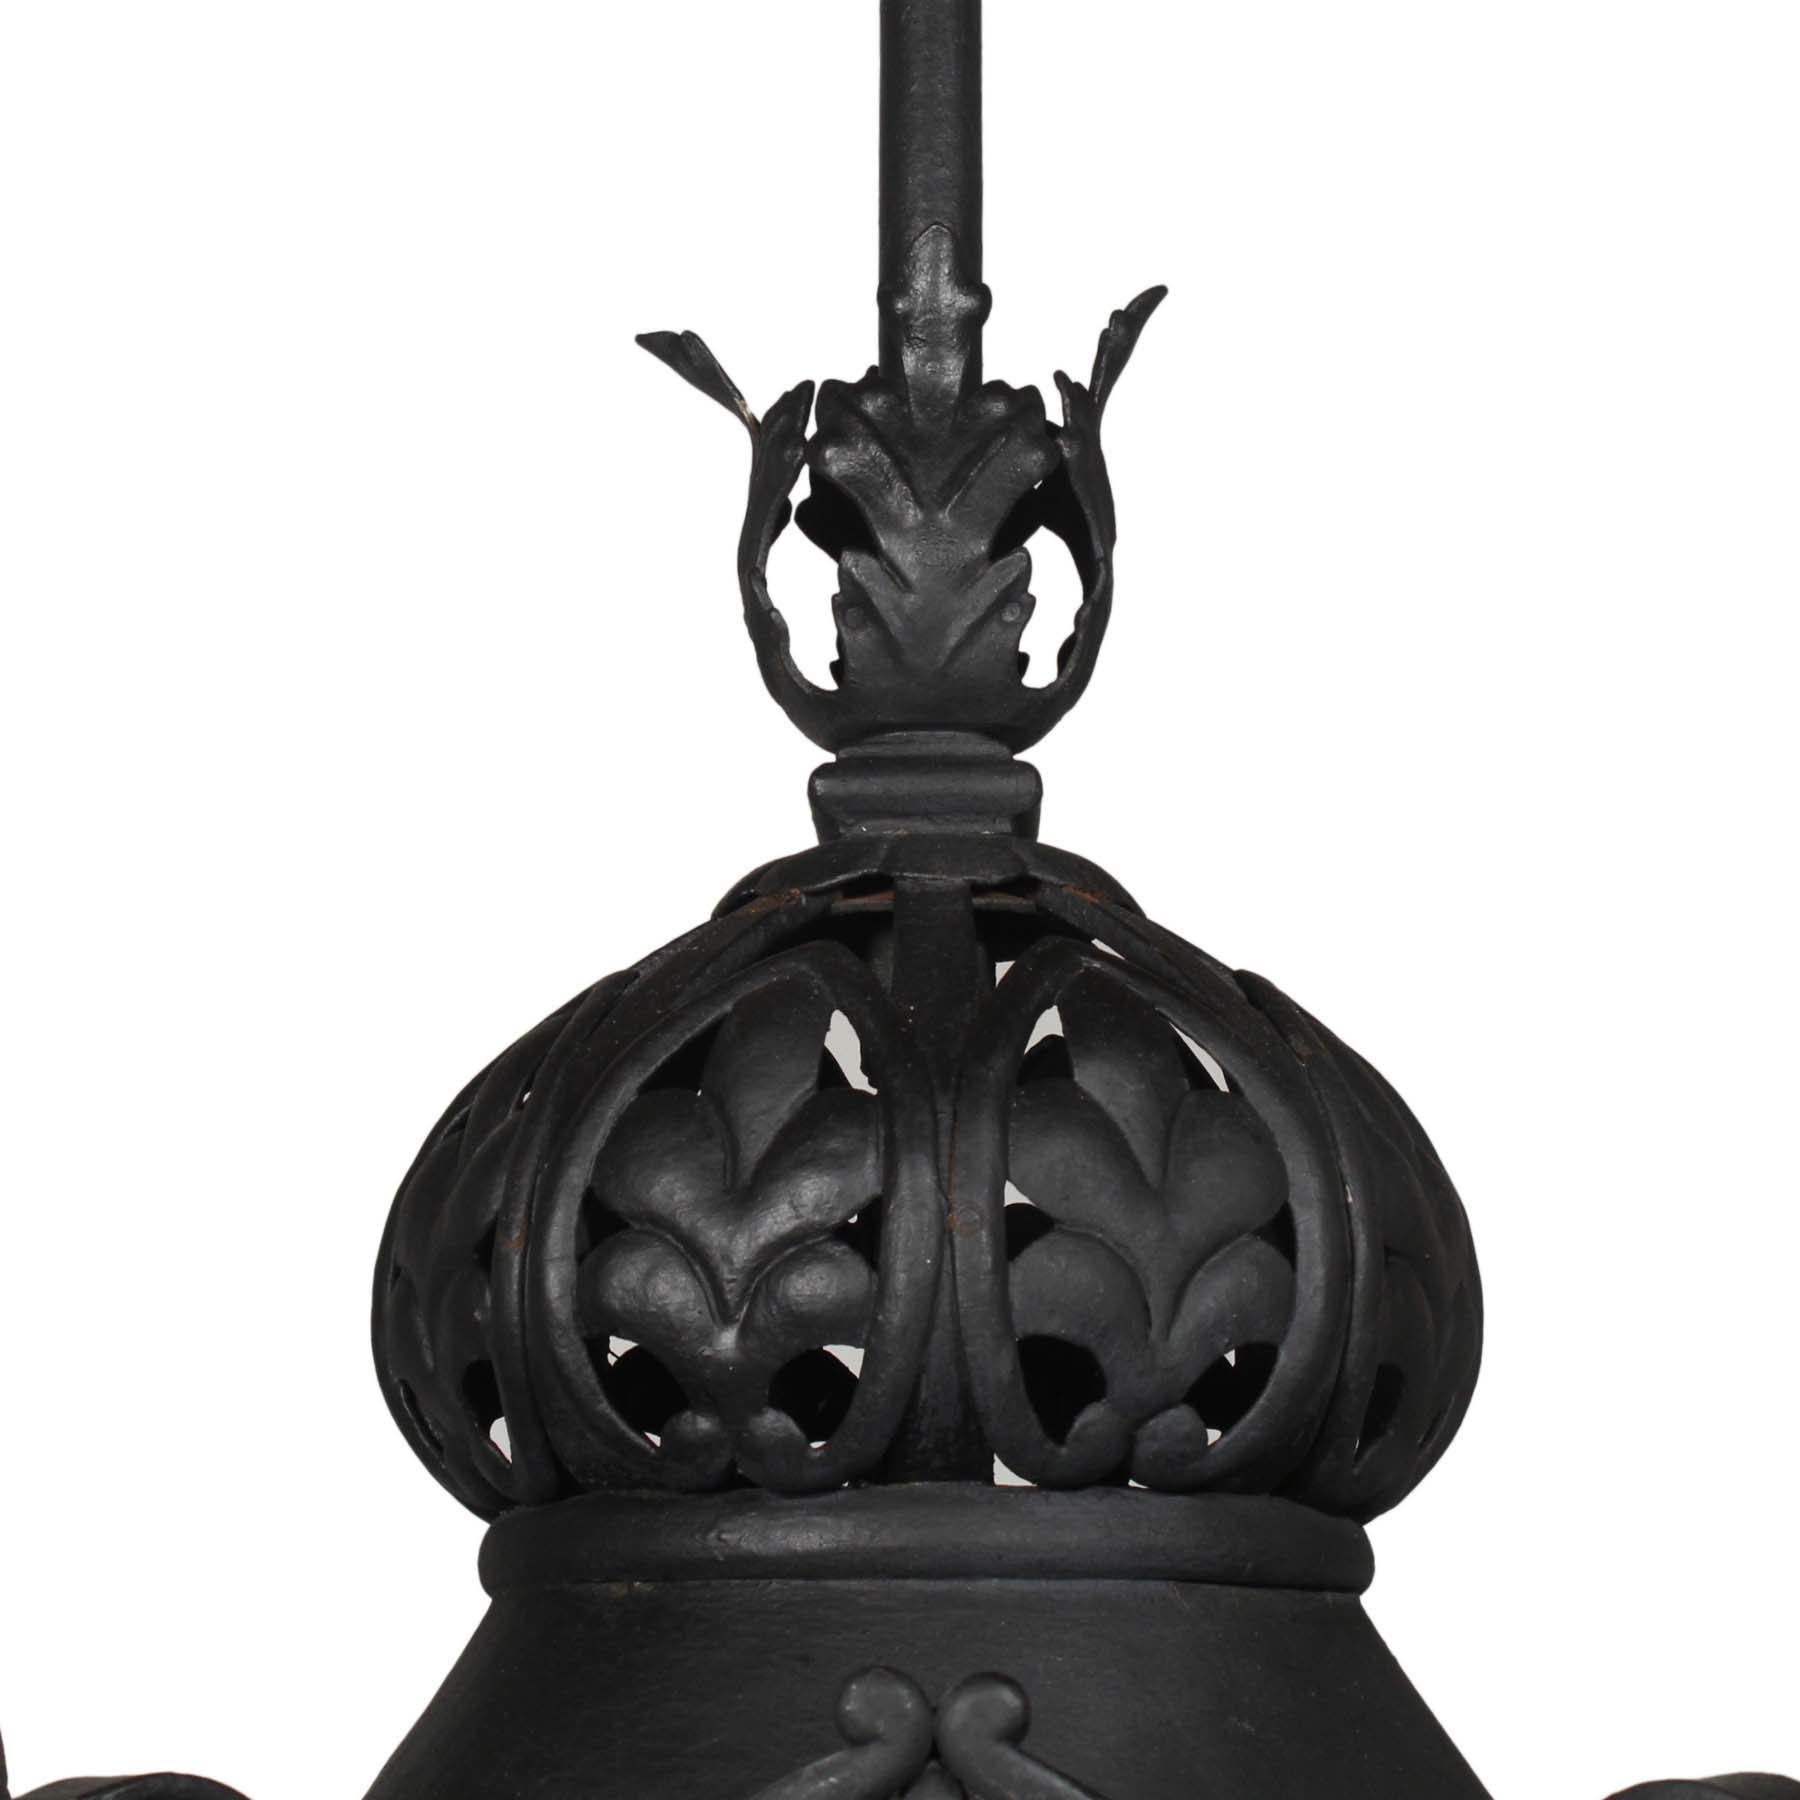 SOLD Antique Hand Riveted Figural Iron Lantern, c. 1880 -67842